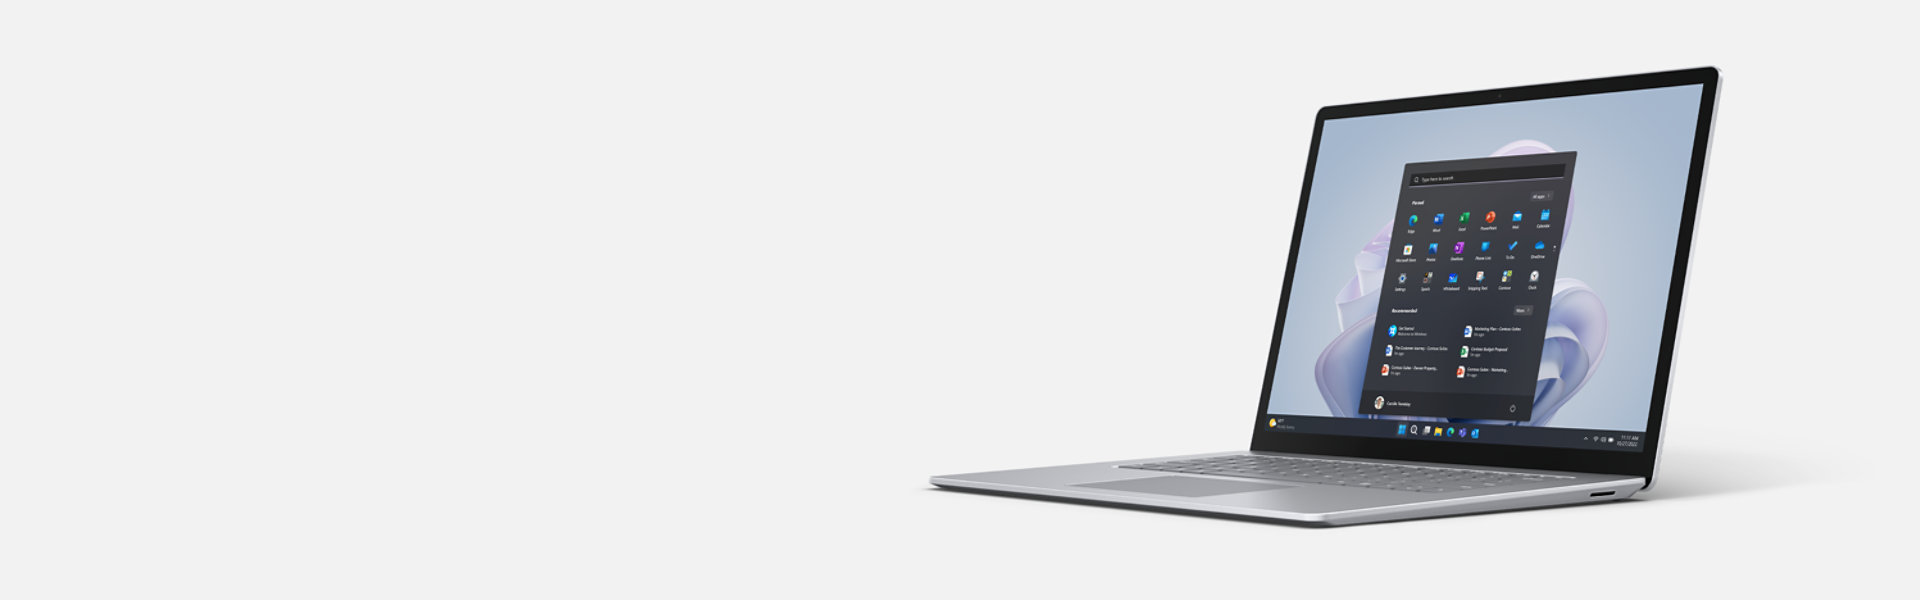 Microsoft - Save up to $100 select Laptop for Business.